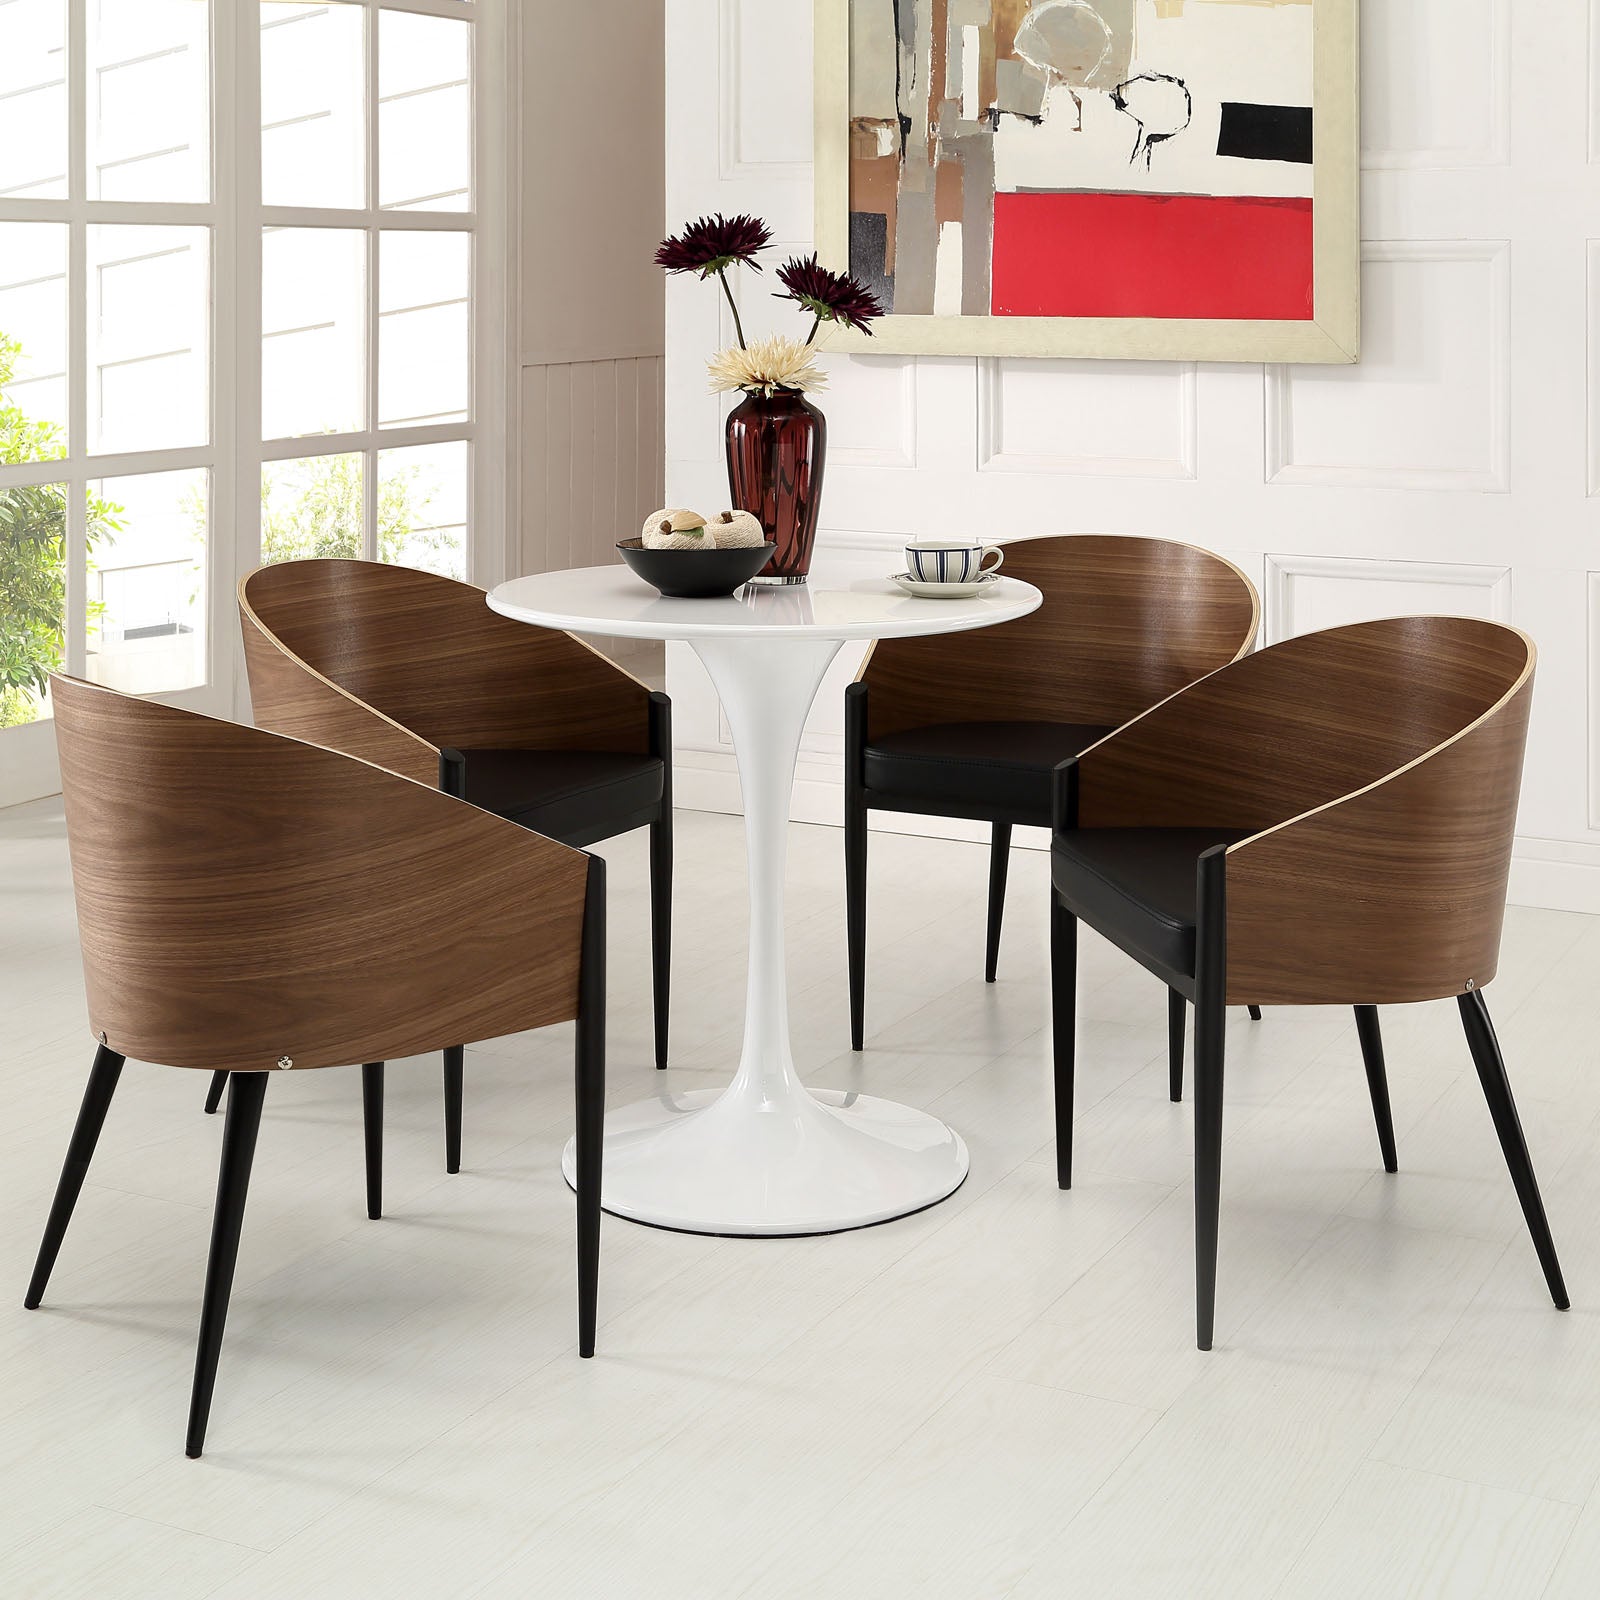 Cooper Dining Chairs Set of 4 - East Shore Modern Home Furnishings